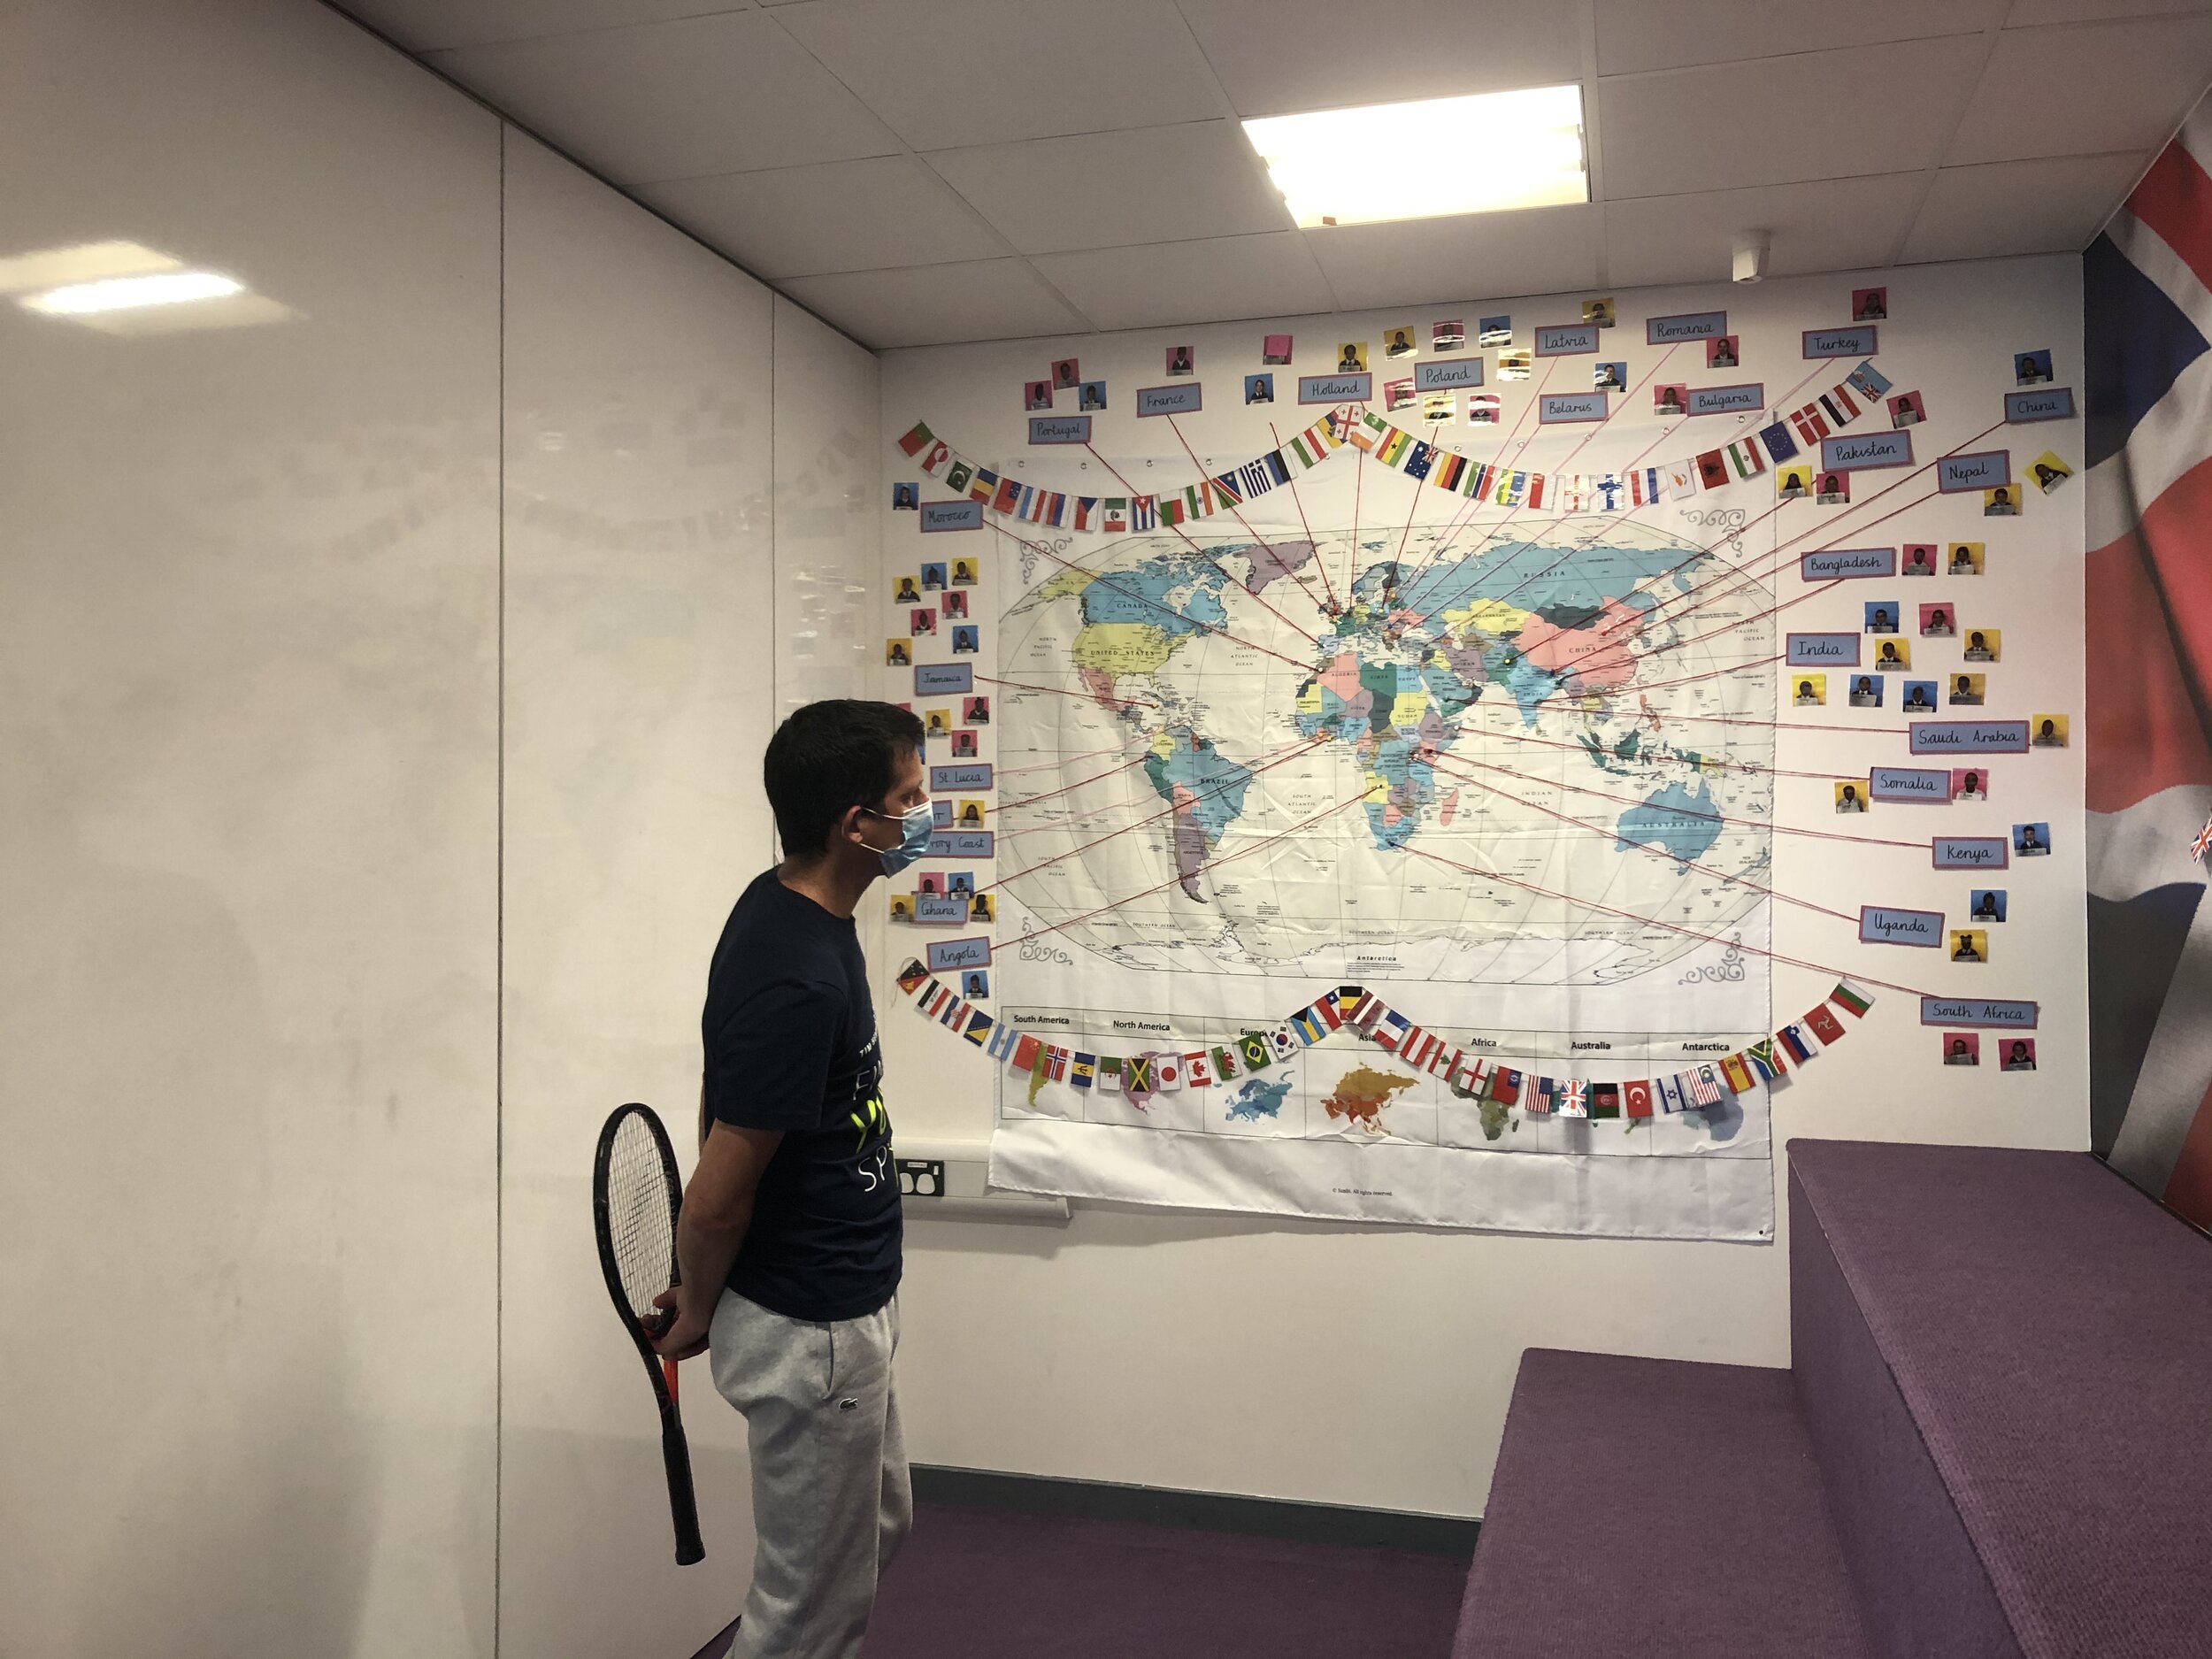 Your donation will support community tennis and table tennis programmes in London Boroughs.&nbsp;Our event in Croydon on June 09 was such a success. Above you see Tim Henman studying a map showing the diversity and need in the  population in some London Boroughs.&nbsp;